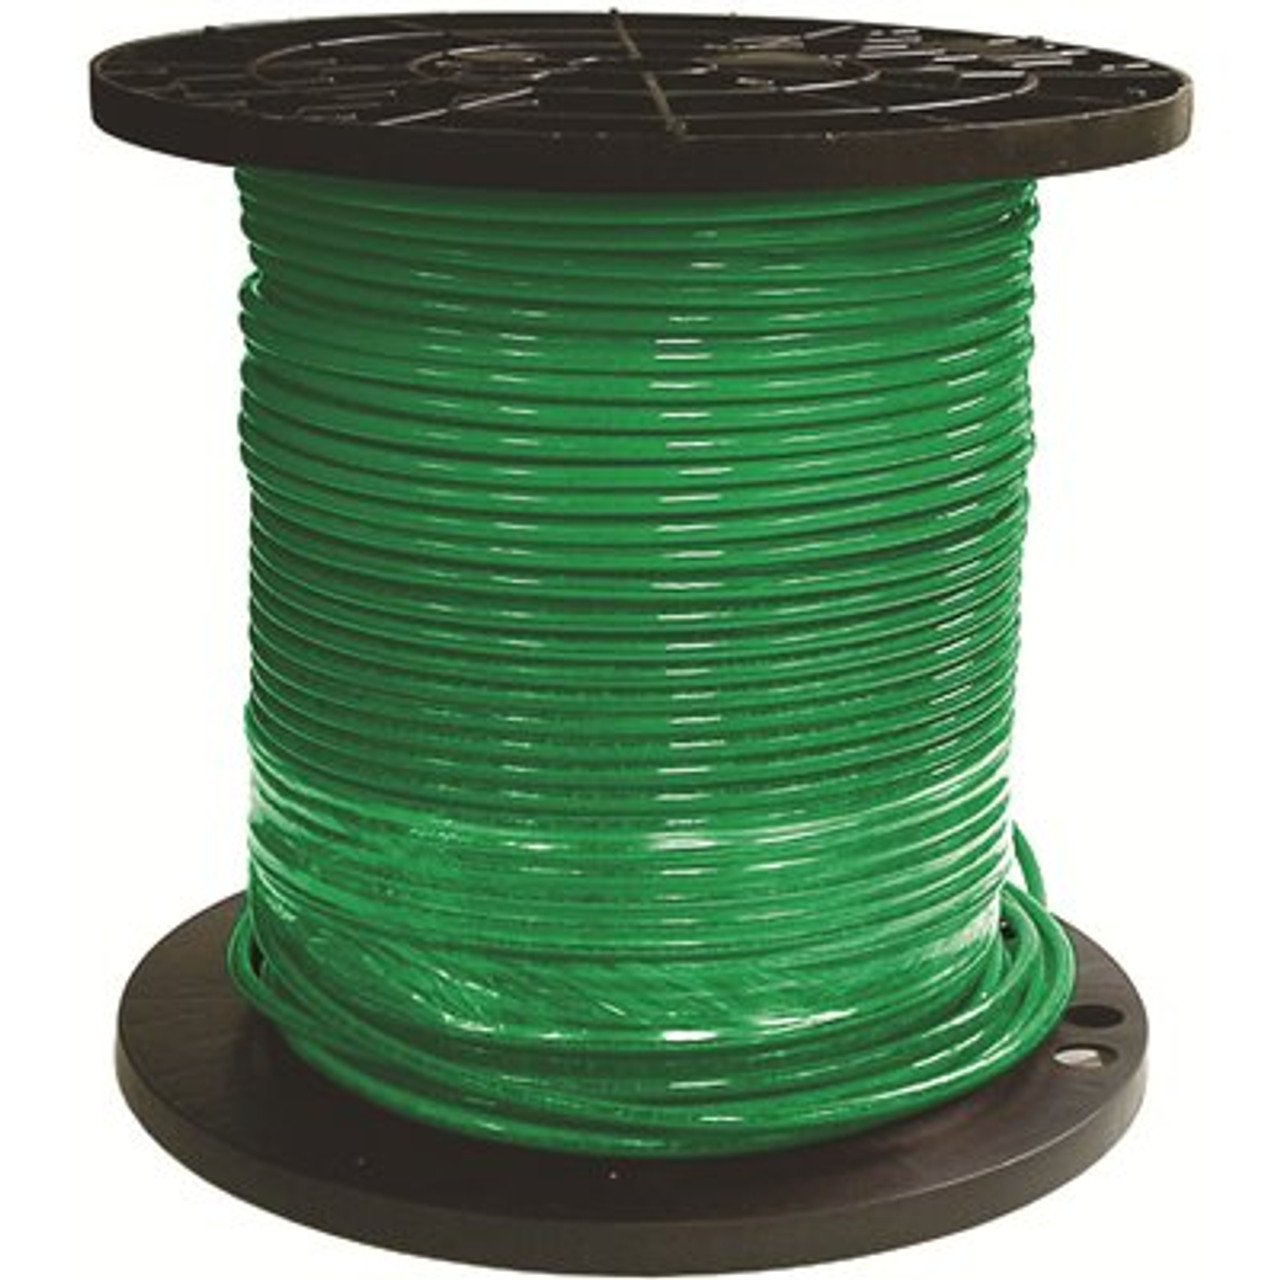 Southwire 500 ft. 6 Green Stranded CU SIMpull THHN Wire